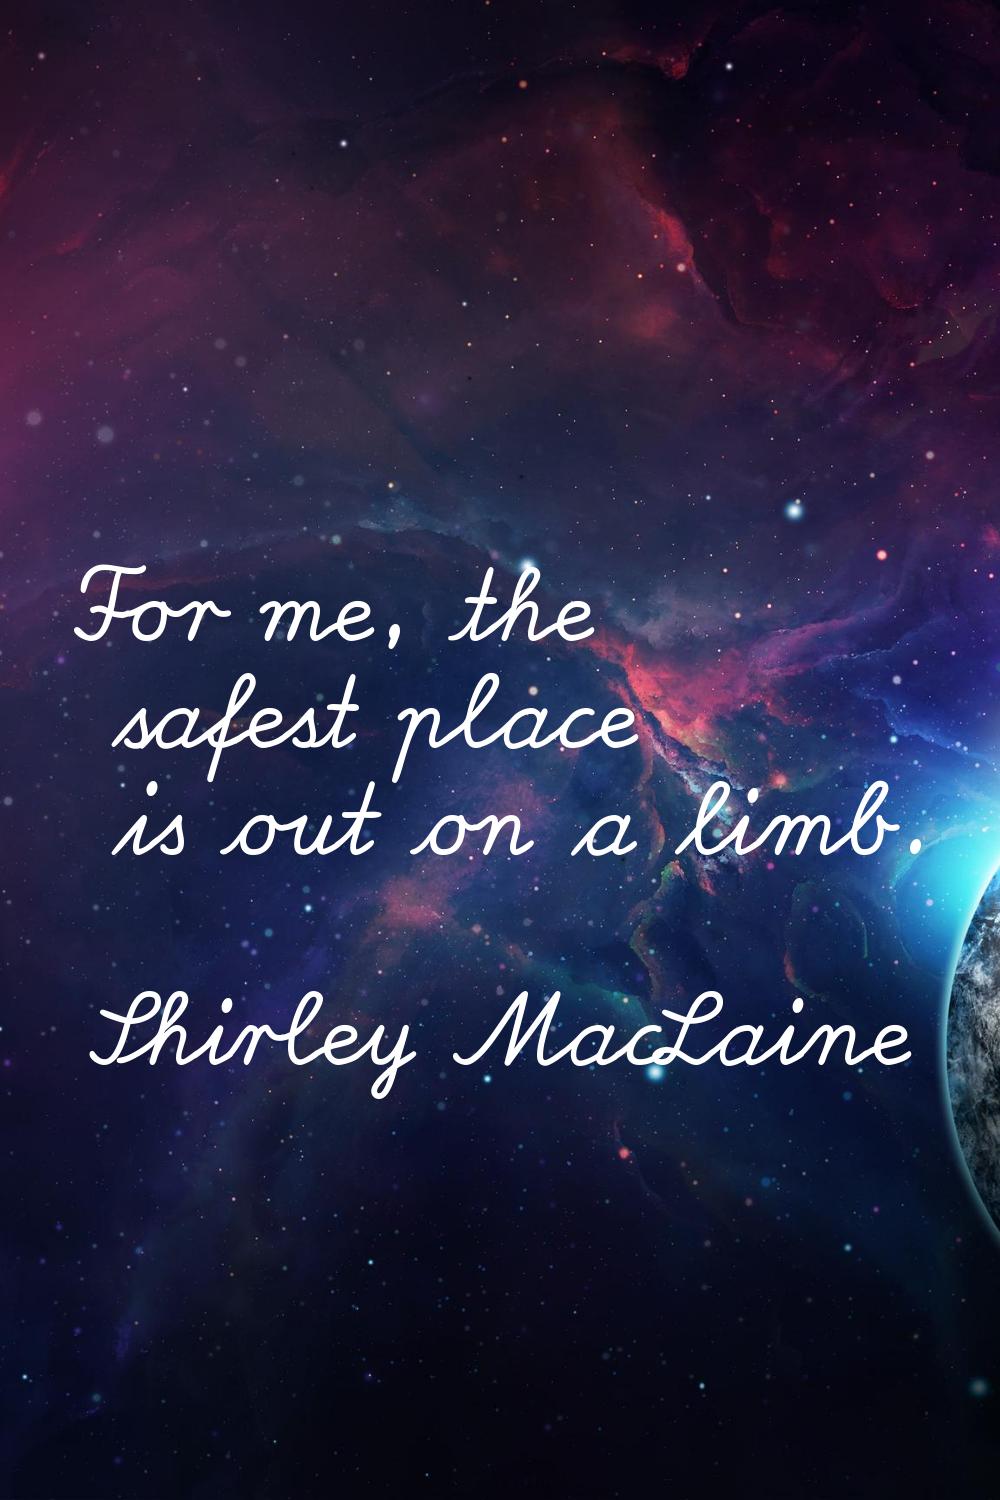 For me, the safest place is out on a limb.